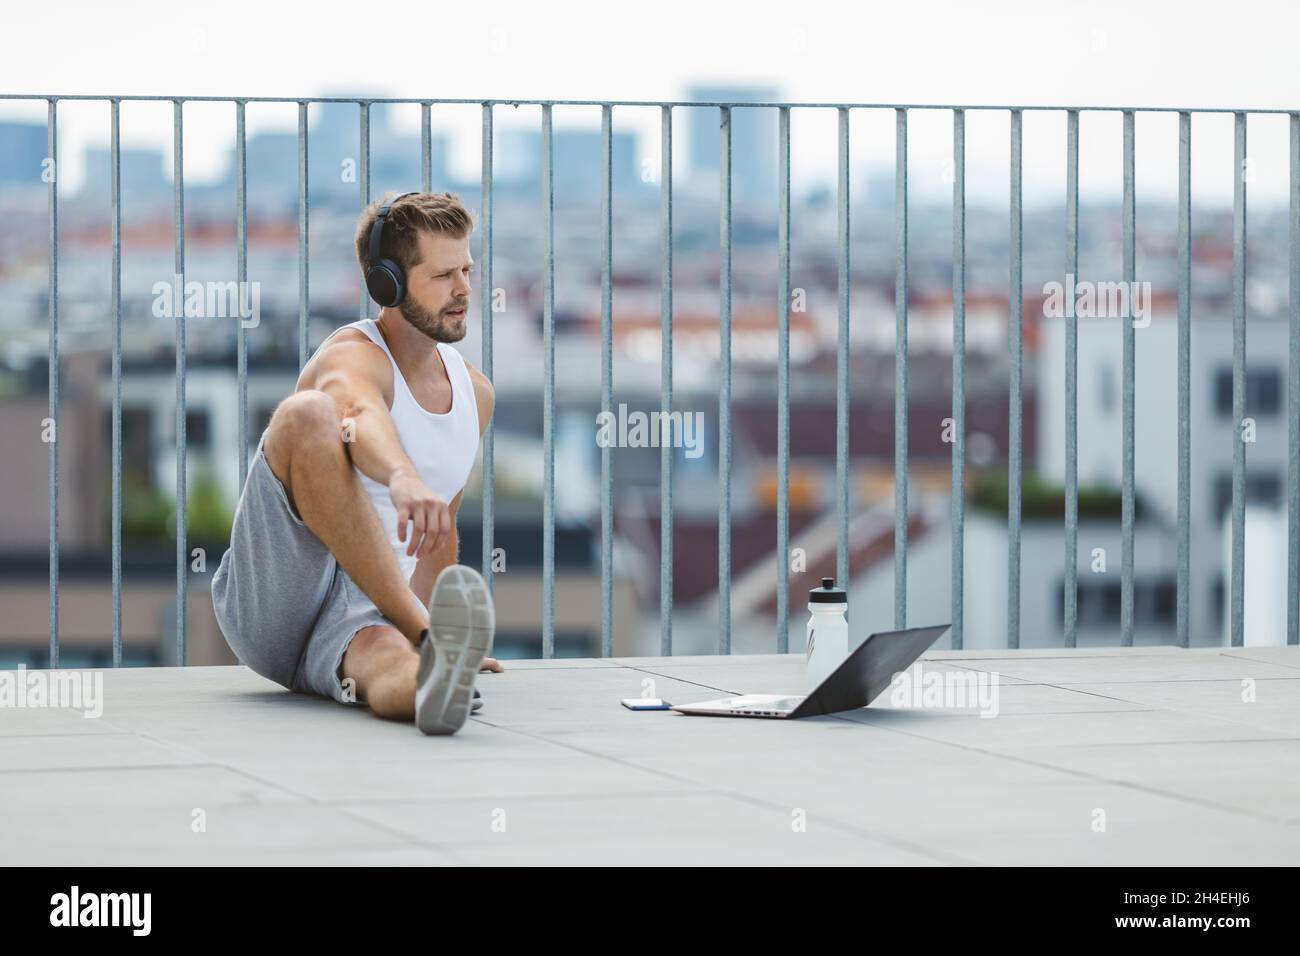 Handsome young man training and working out outdoors Stock Photo